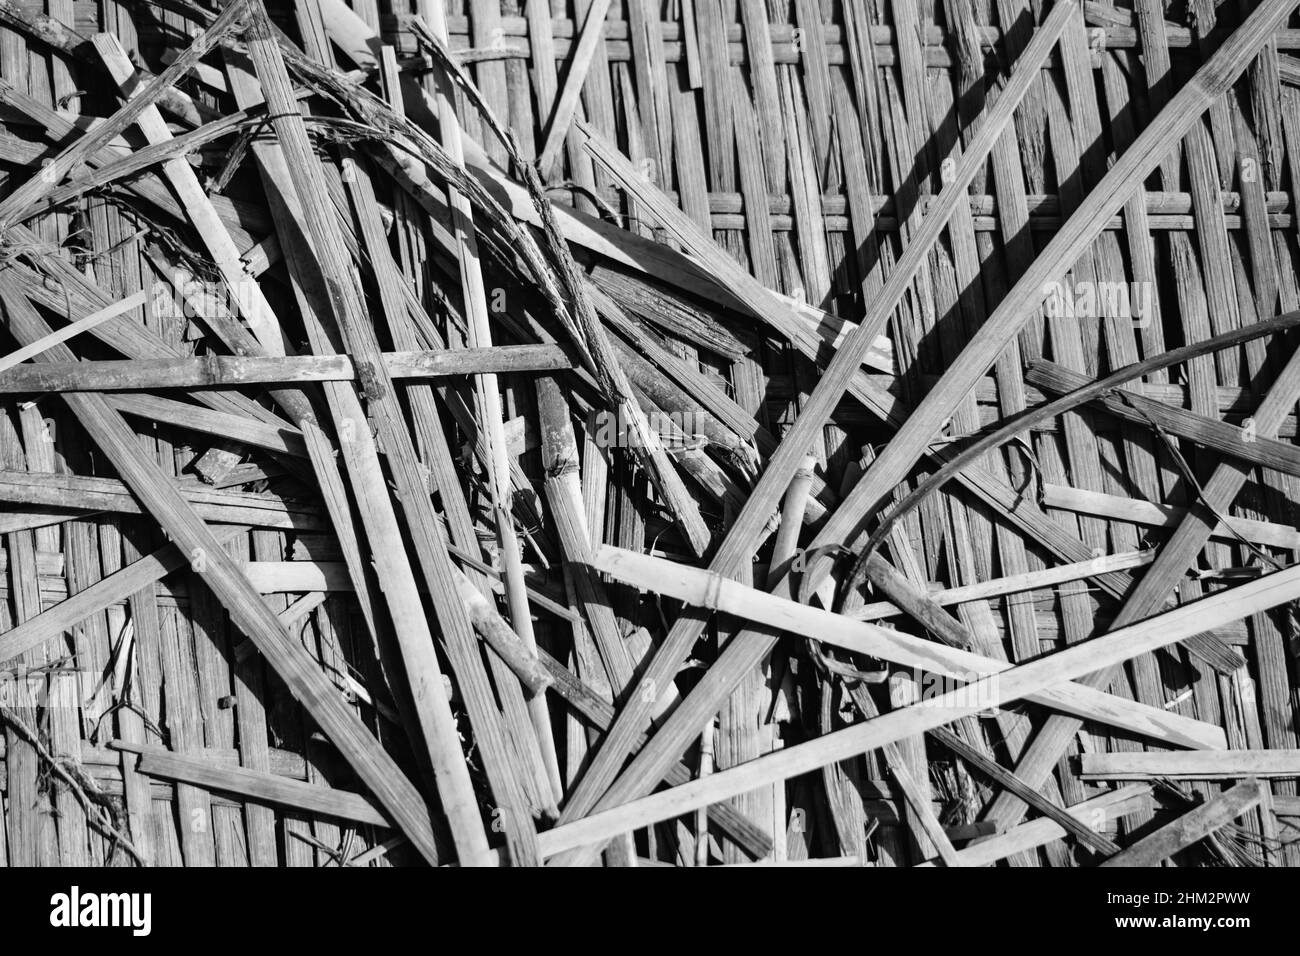 Real nature abstract background. Bamboo straws weaving texture mat, light dark black white gray colour vintage effect. Calm warm simple life style Stock Photo